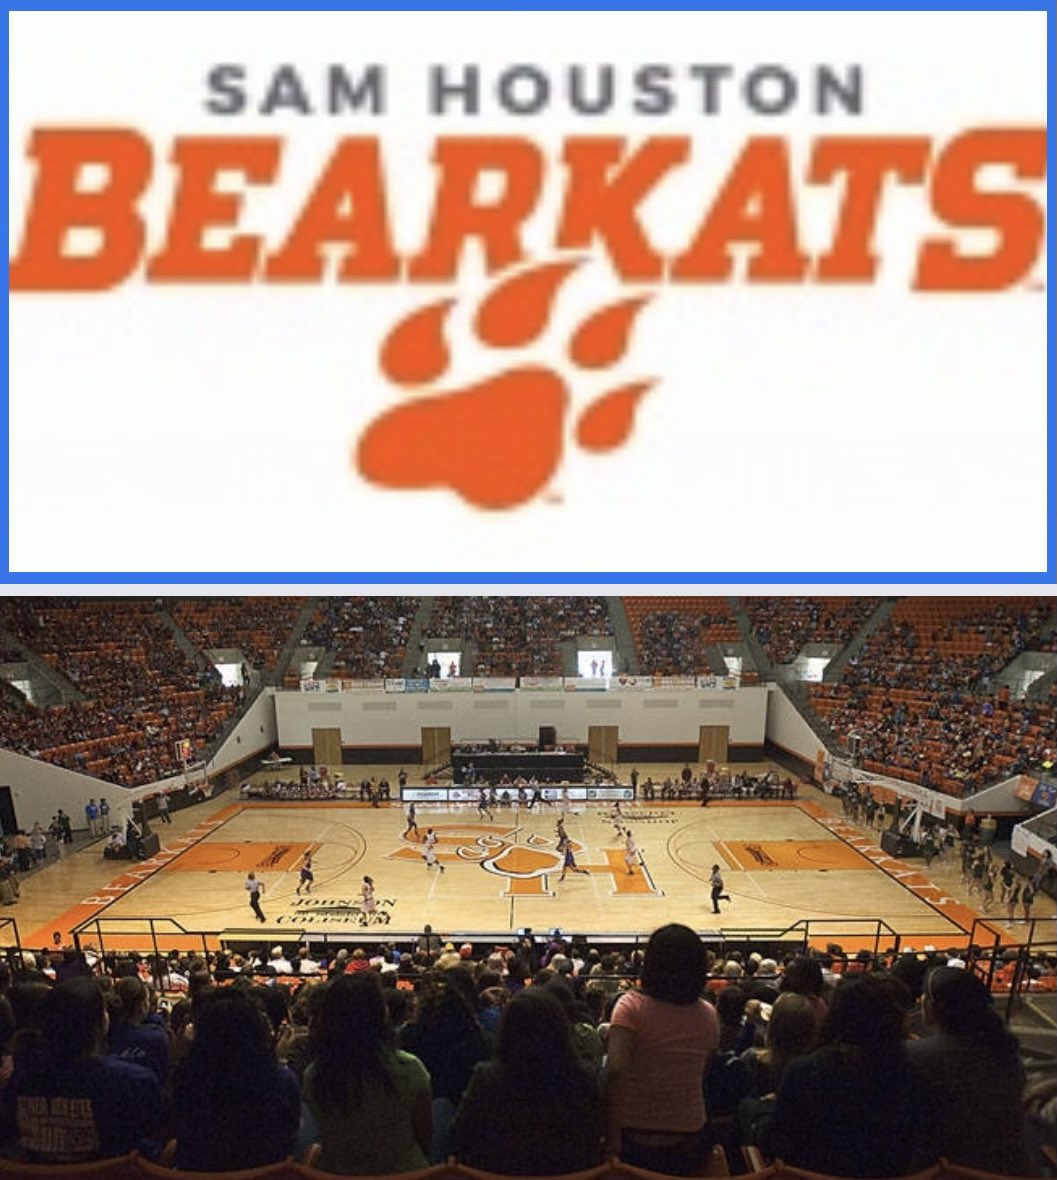 Extremely blessed and grateful to receive a scholarship offer to play the game I love from Sam Houston State! Thank you @Chris_Mudge and @CoachJHoot for believing in me. #gobearkats @TeamGriffinEYBL @CoachBerokoff @JohnRobyGriffin @DaleBBallOK